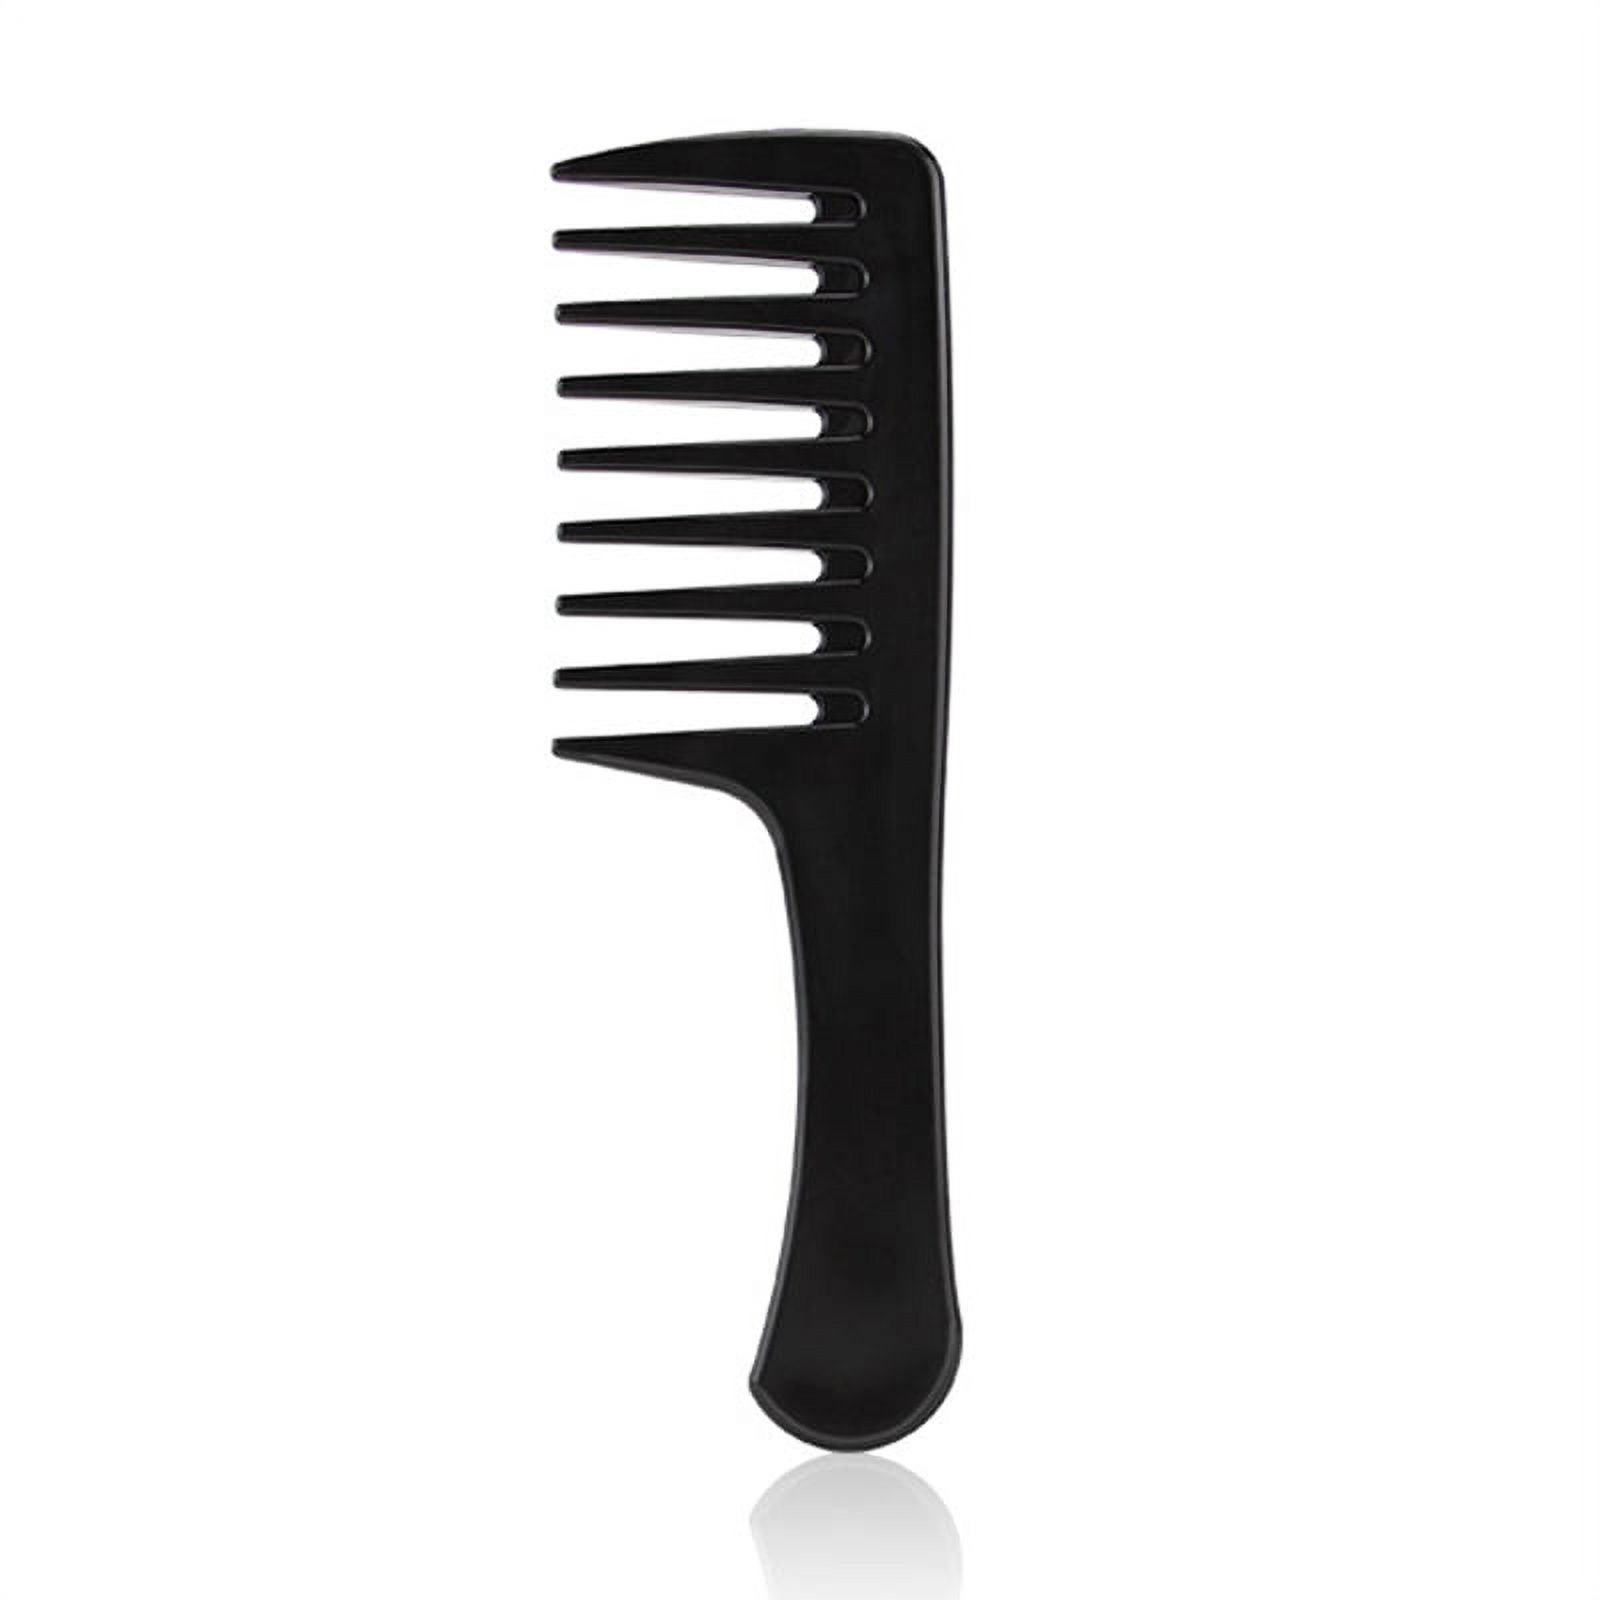 Smooth Hair Comb Plastic Household Candy Color Big Tooth Comb Black Wide Tooth Comb Durable Detangling Hair Brush Professional Handgrip Comb for Curly Hair Long Hair Wet Hair New - image 2 of 2